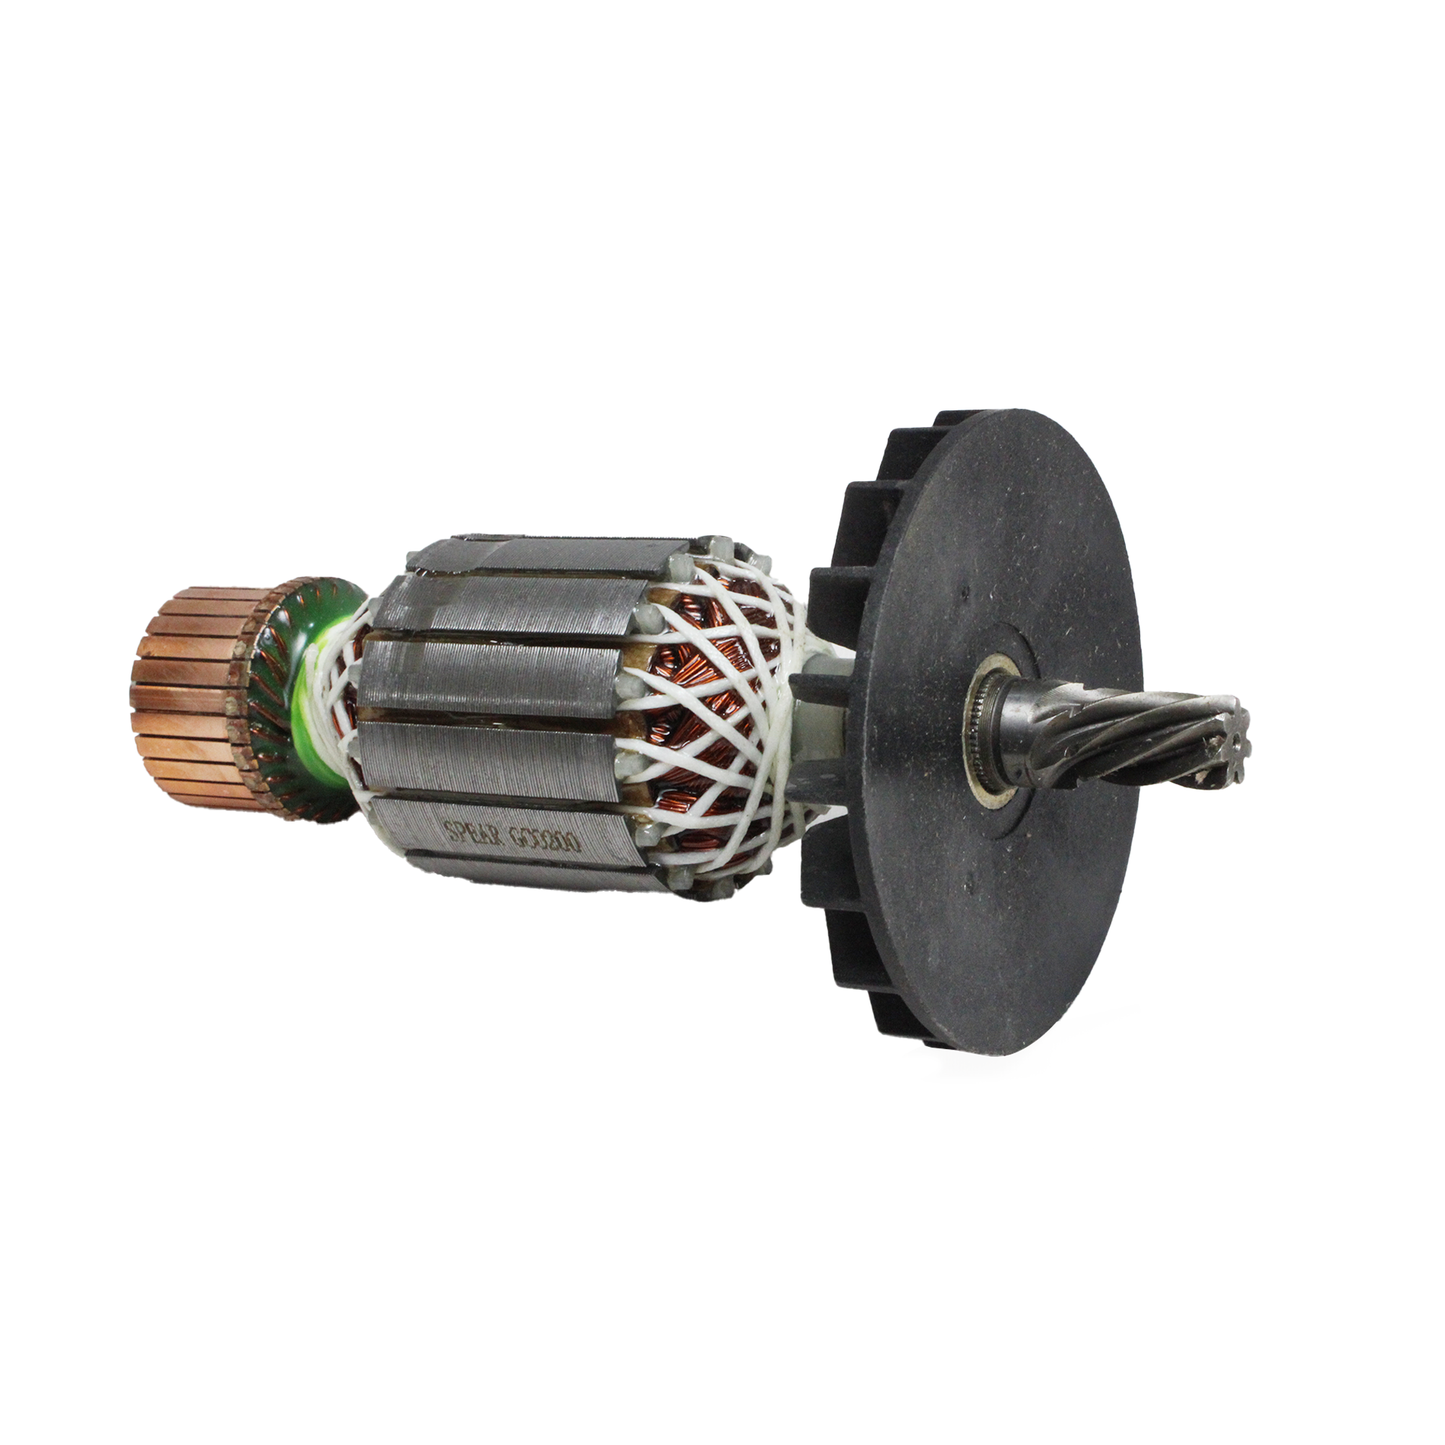 AEGON ACWFGC0200 Copper Armature - Compatible with Bosch GCO 200/220 Chopsaw and Similar Models of Other Brands